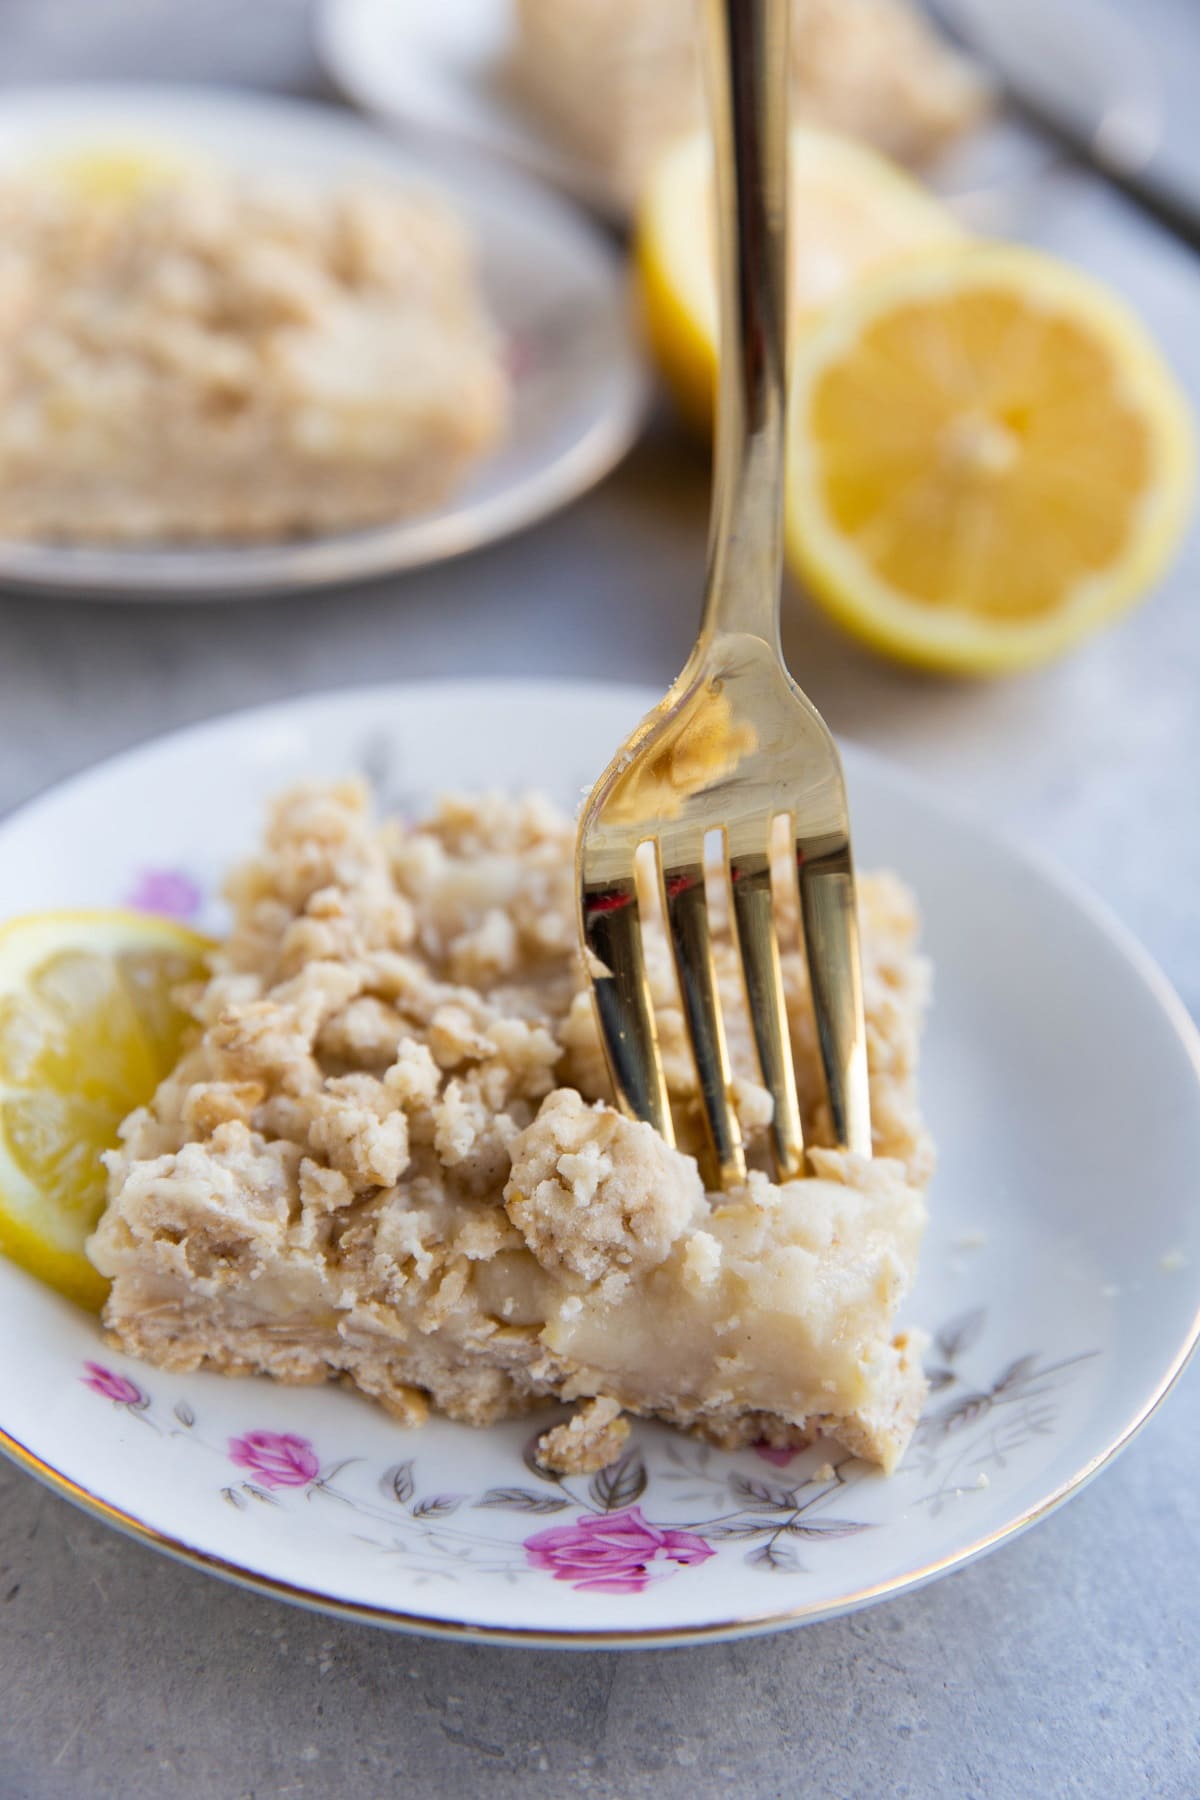 Slice of lemon bar on a plate with a fork taking a bite out.